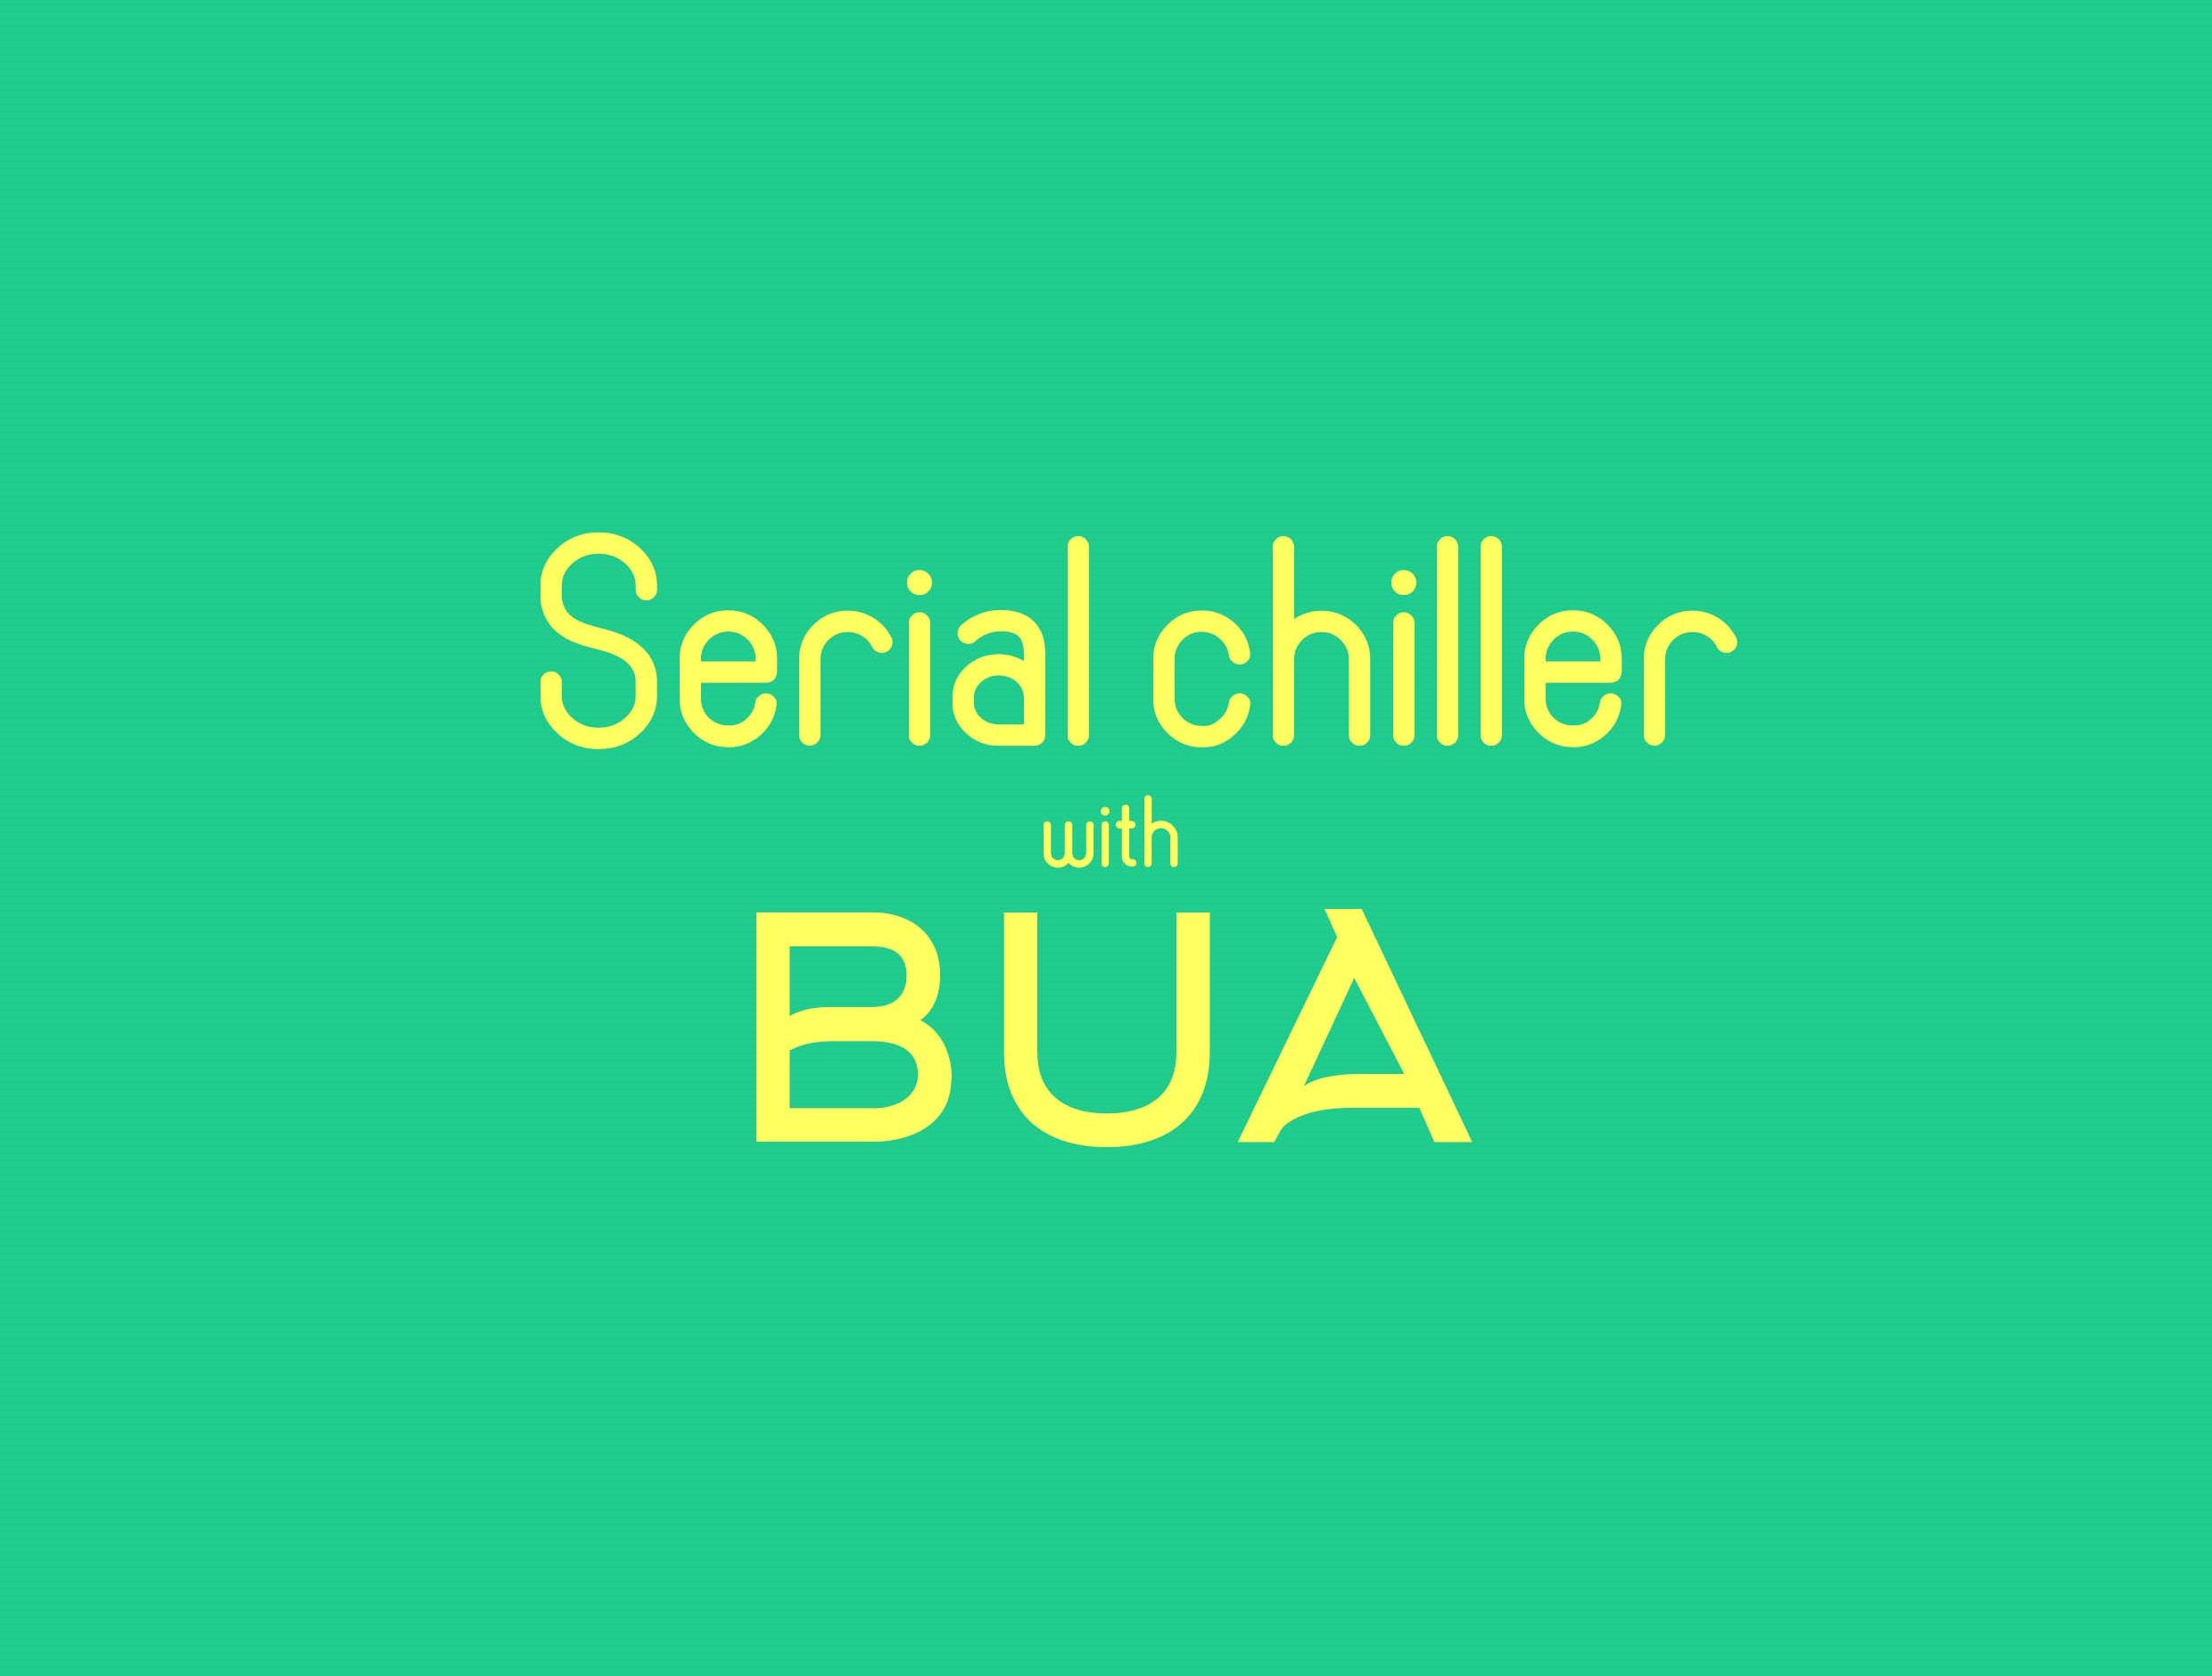 Serial-chiller-with-bua.jpg